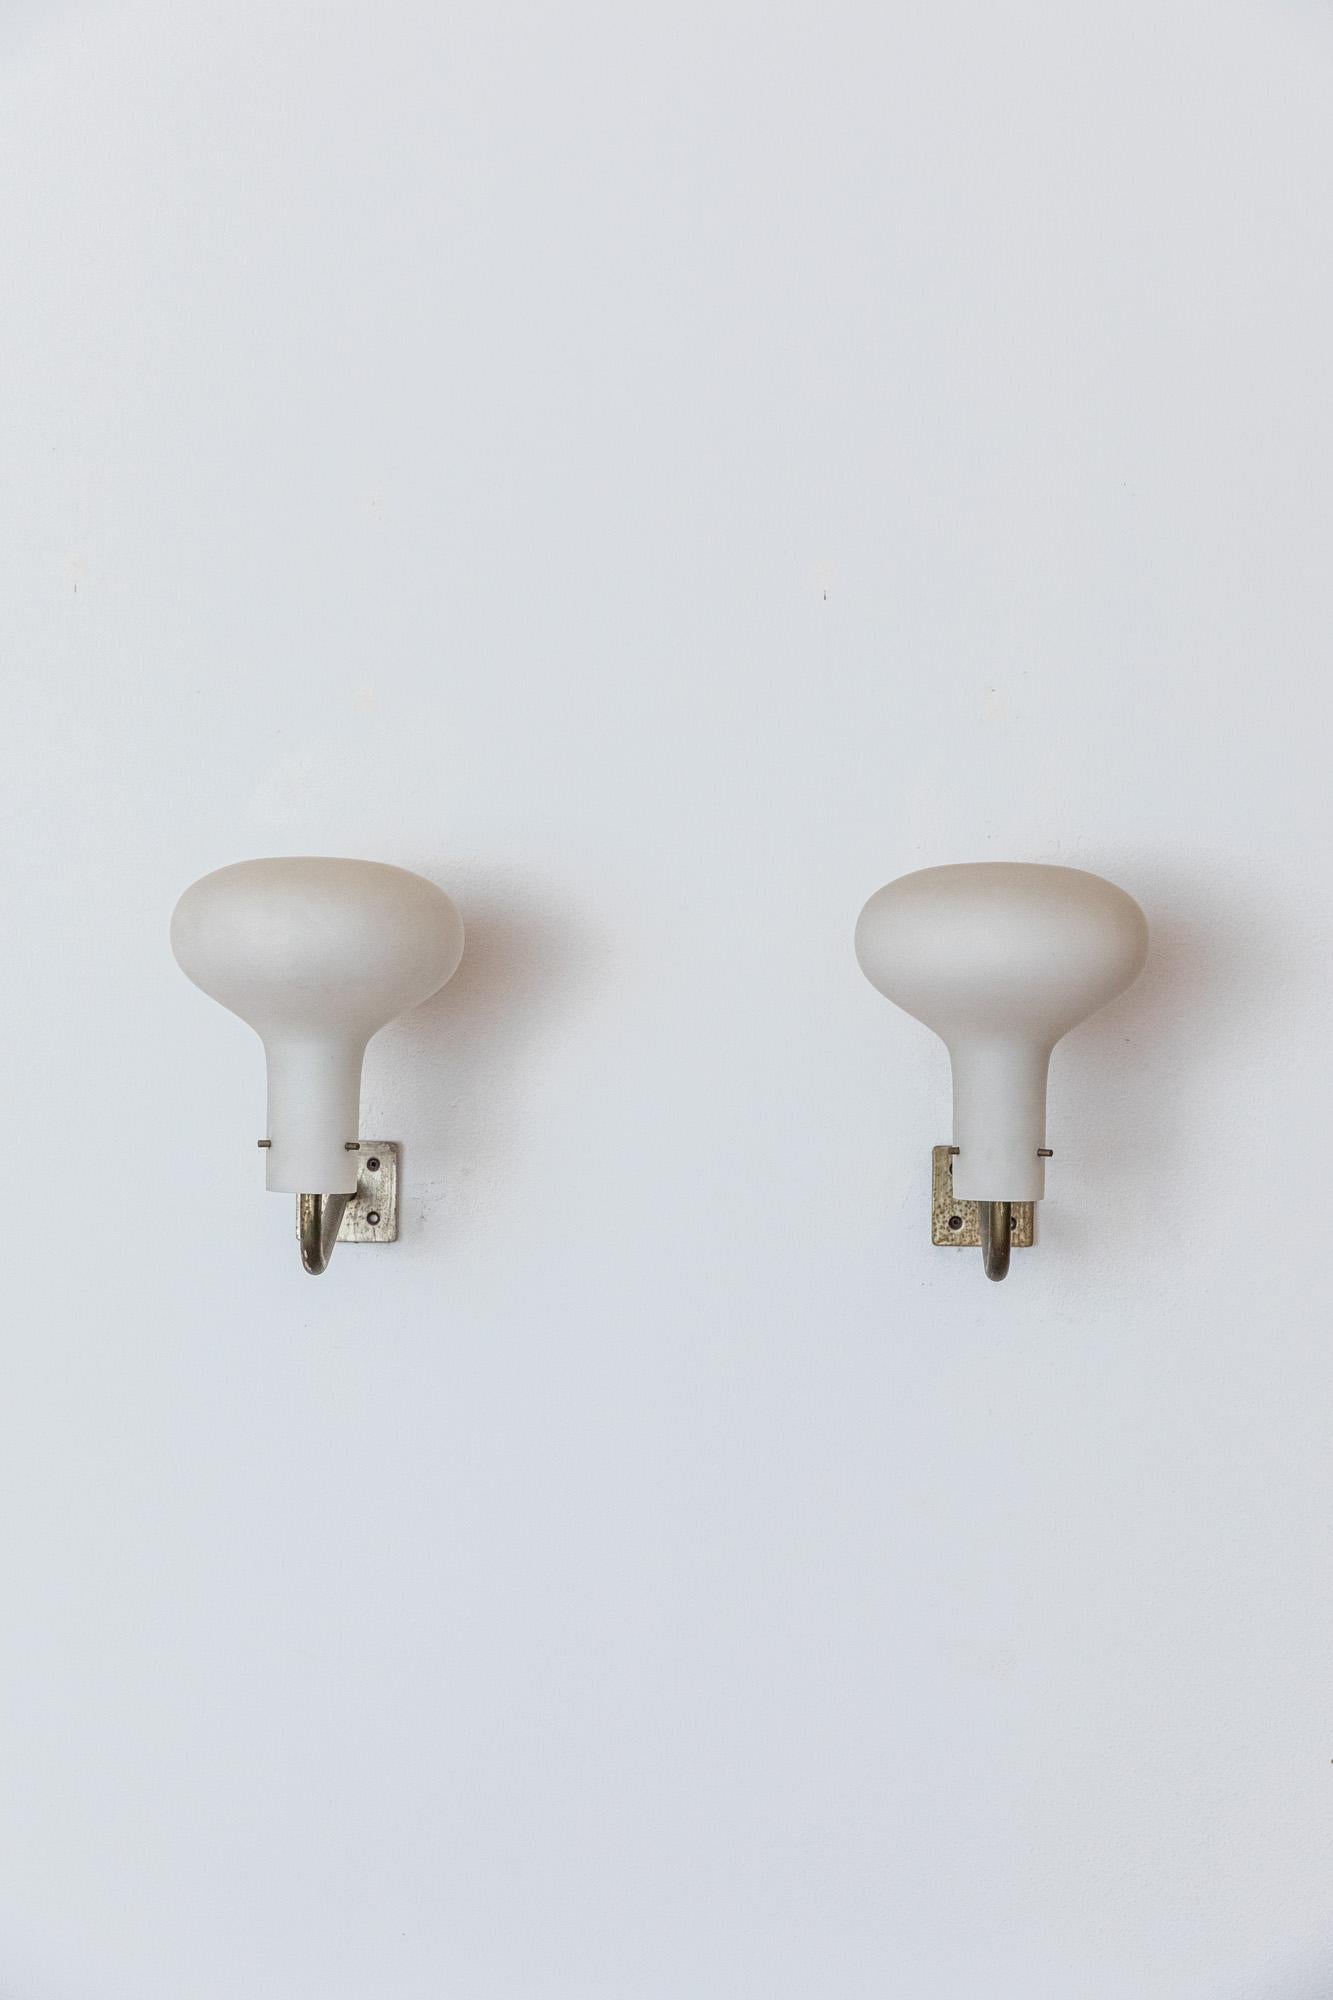 Iconic pair of LP12 wall lights designed by Ignazio Gardella for Azucena. 
Nickeled brass hardware with one large satin glass diffusers. 
Italy, 1950. 
Excellent vintage condition 